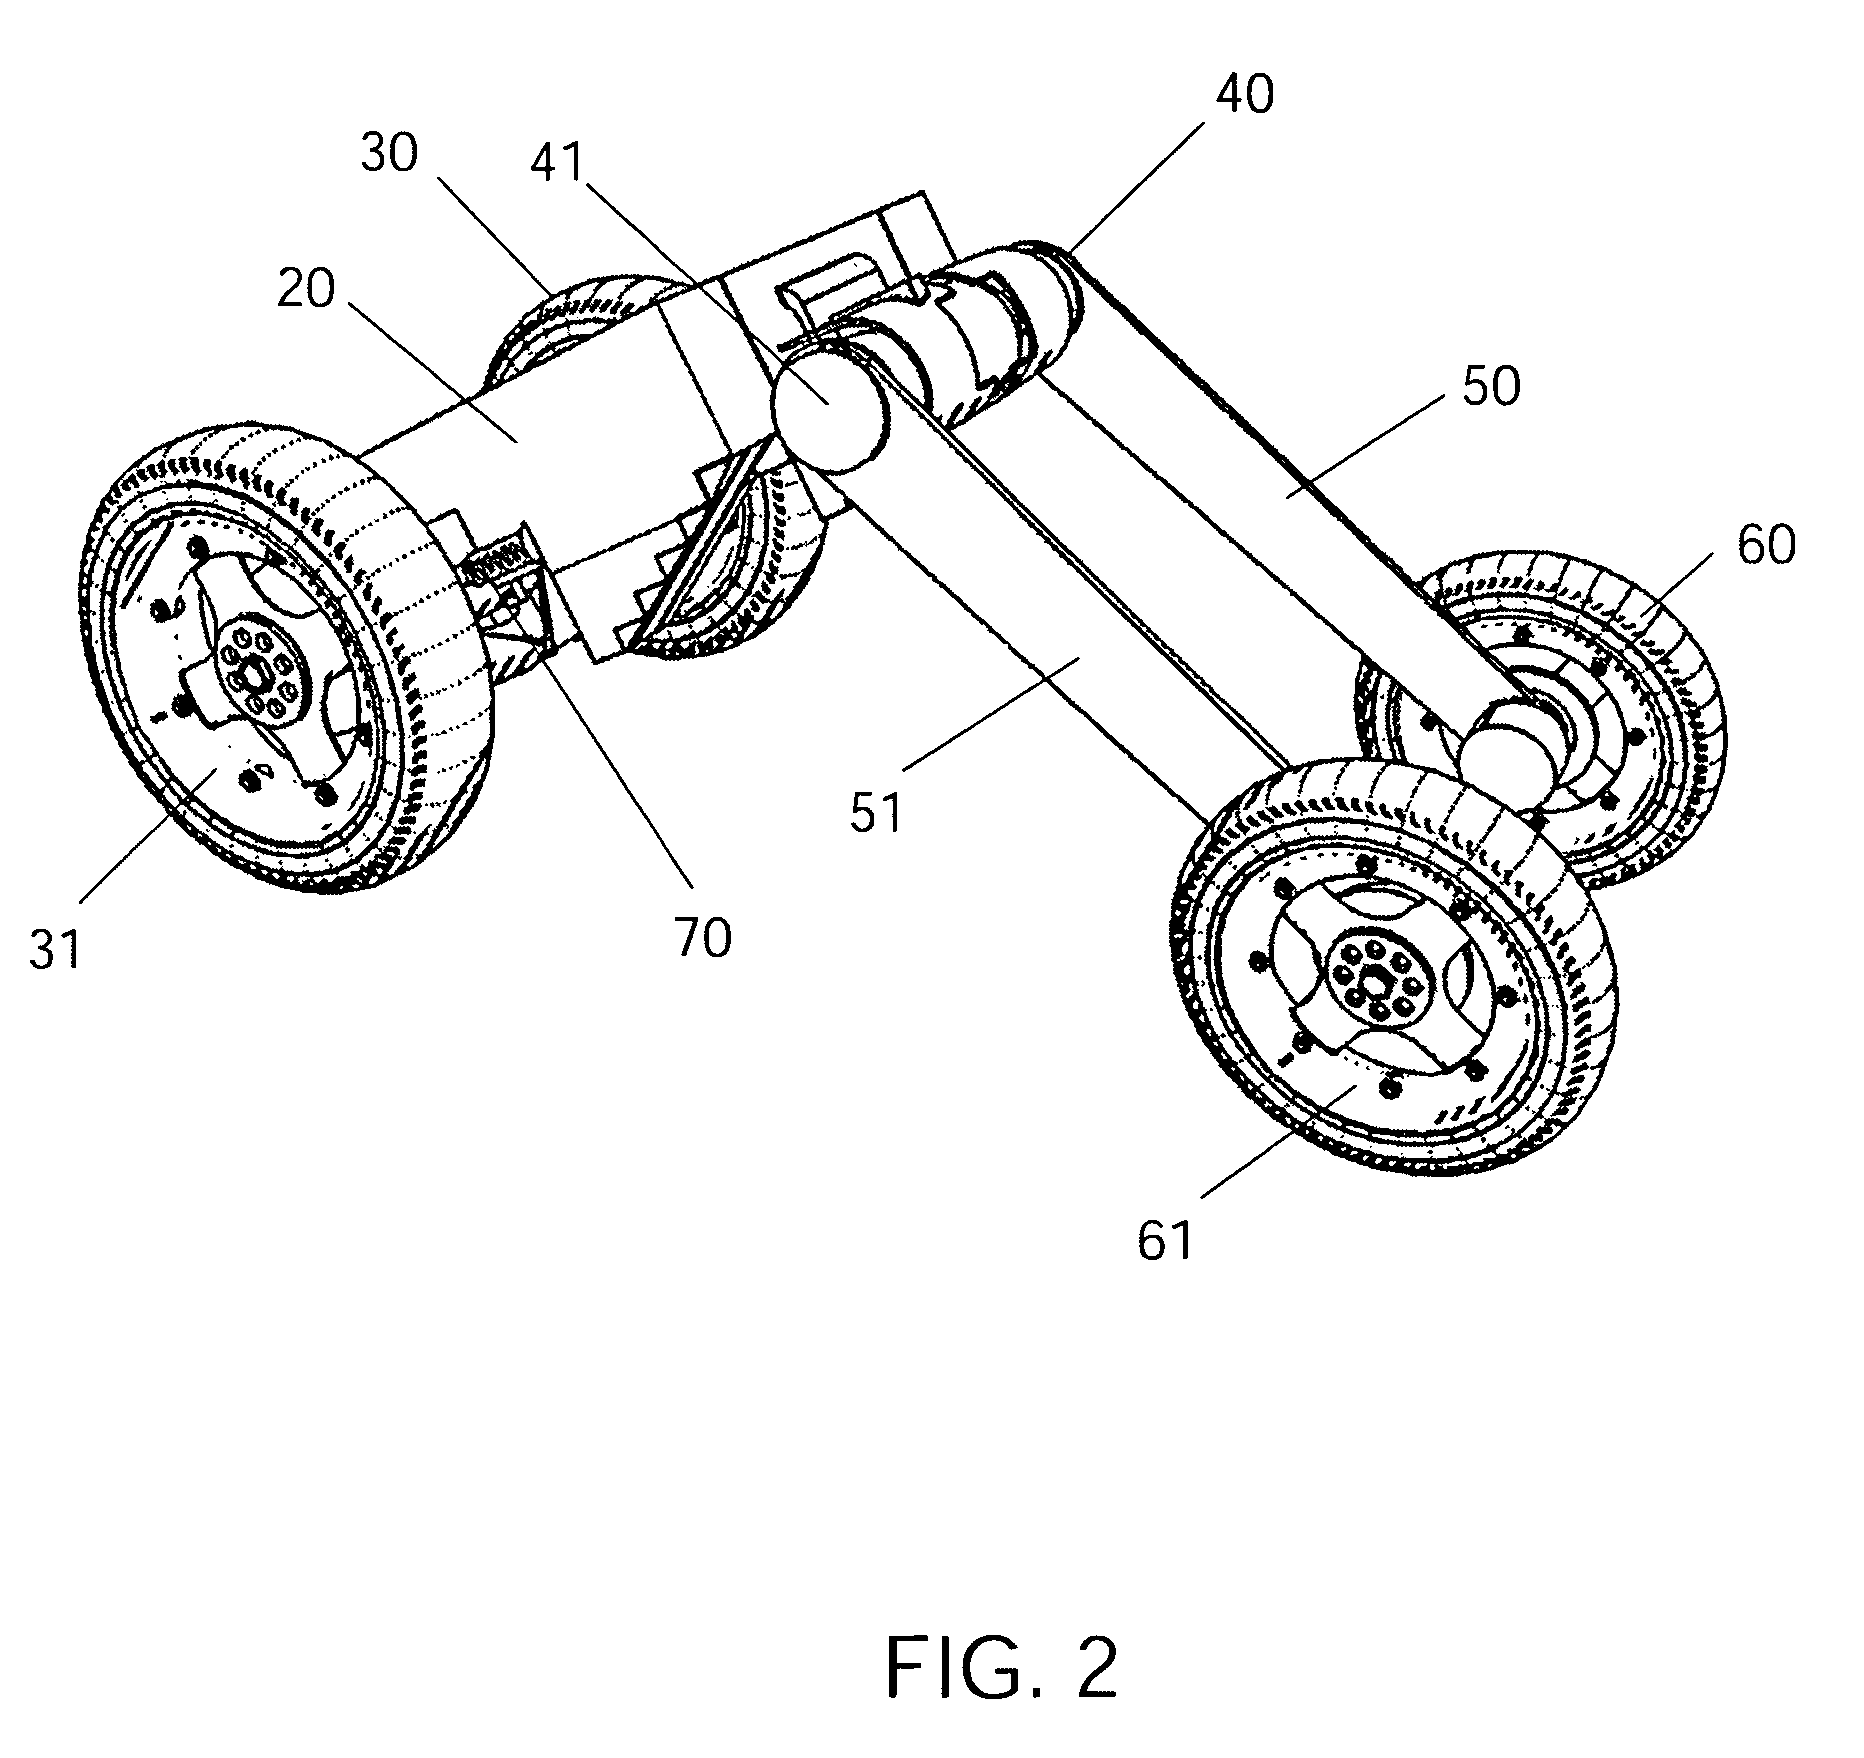 Reconfigurable balancing robot and method for dynamically transitioning between statically stable mode and dynamically balanced mode